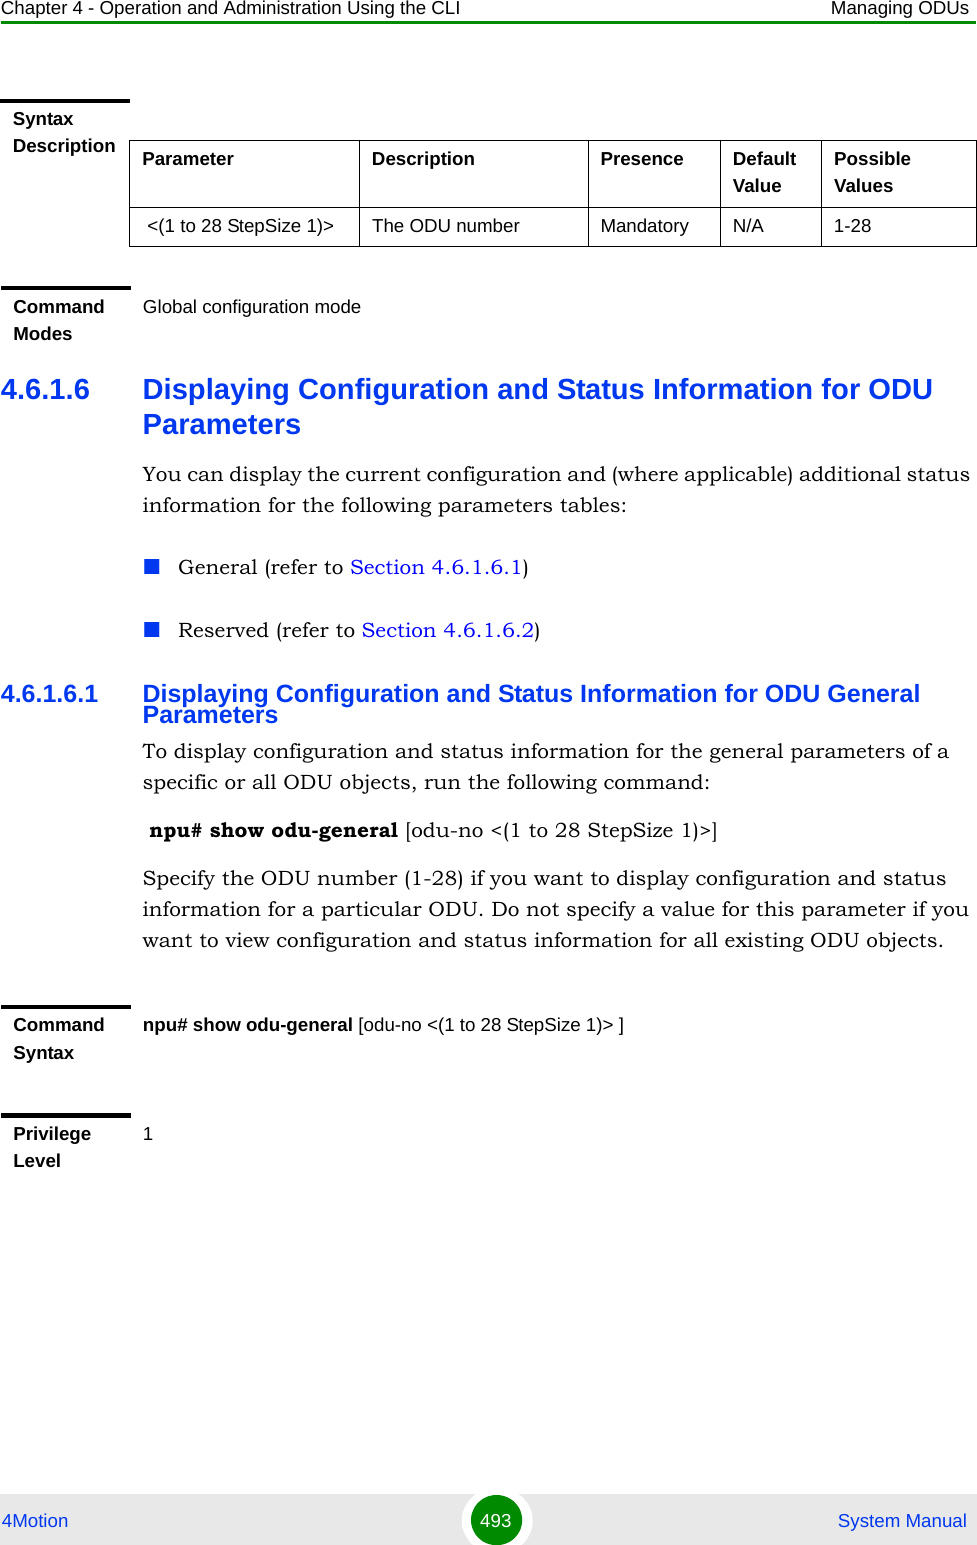 Chapter 4 - Operation and Administration Using the CLI Managing ODUs4Motion 493  System Manual4.6.1.6 Displaying Configuration and Status Information for ODU ParametersYou can display the current configuration and (where applicable) additional status information for the following parameters tables:General (refer to Section 4.6.1.6.1)Reserved (refer to Section 4.6.1.6.2)4.6.1.6.1 Displaying Configuration and Status Information for ODU General ParametersTo display configuration and status information for the general parameters of a specific or all ODU objects, run the following command: npu# show odu-general [odu-no &lt;(1 to 28 StepSize 1)&gt;]Specify the ODU number (1-28) if you want to display configuration and status information for a particular ODU. Do not specify a value for this parameter if you want to view configuration and status information for all existing ODU objects.Syntax Description Parameter Description Presence Default ValuePossible Values &lt;(1 to 28 StepSize 1)&gt; The ODU number  Mandatory N/A 1-28Command ModesGlobal configuration modeCommand Syntaxnpu# show odu-general [odu-no &lt;(1 to 28 StepSize 1)&gt; ]Privilege Level1